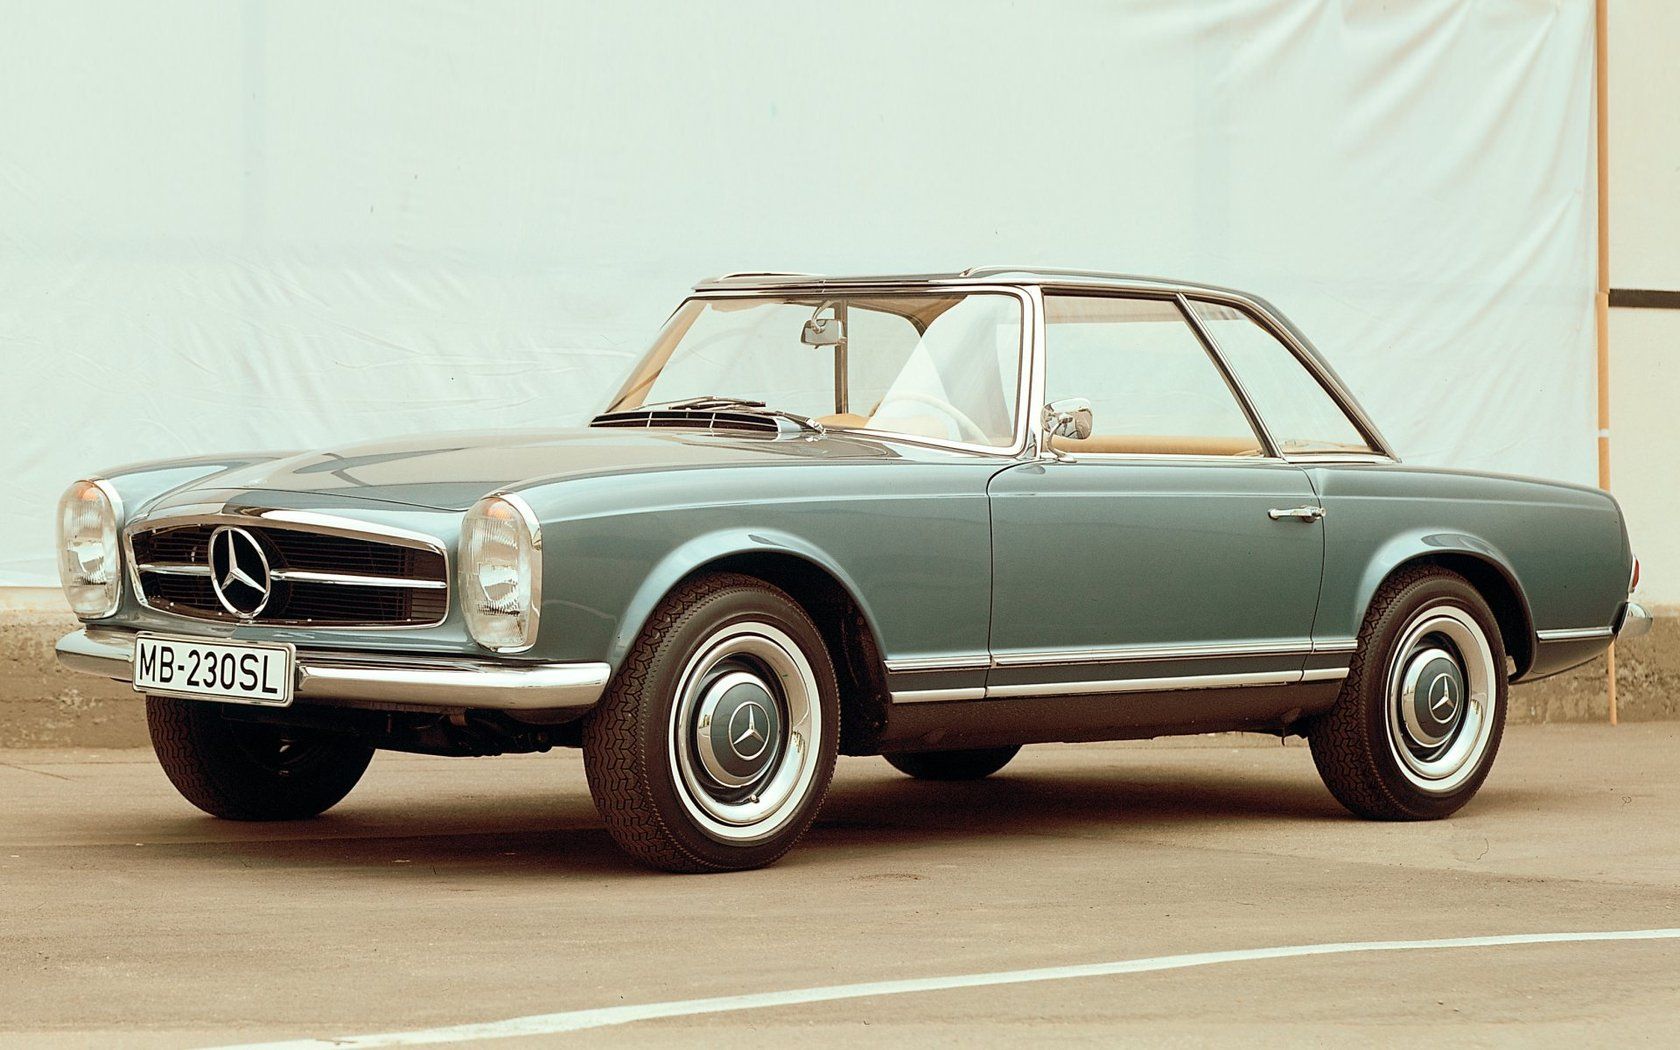 Mercedes Benz 230sl Photo And Video Review. Comments